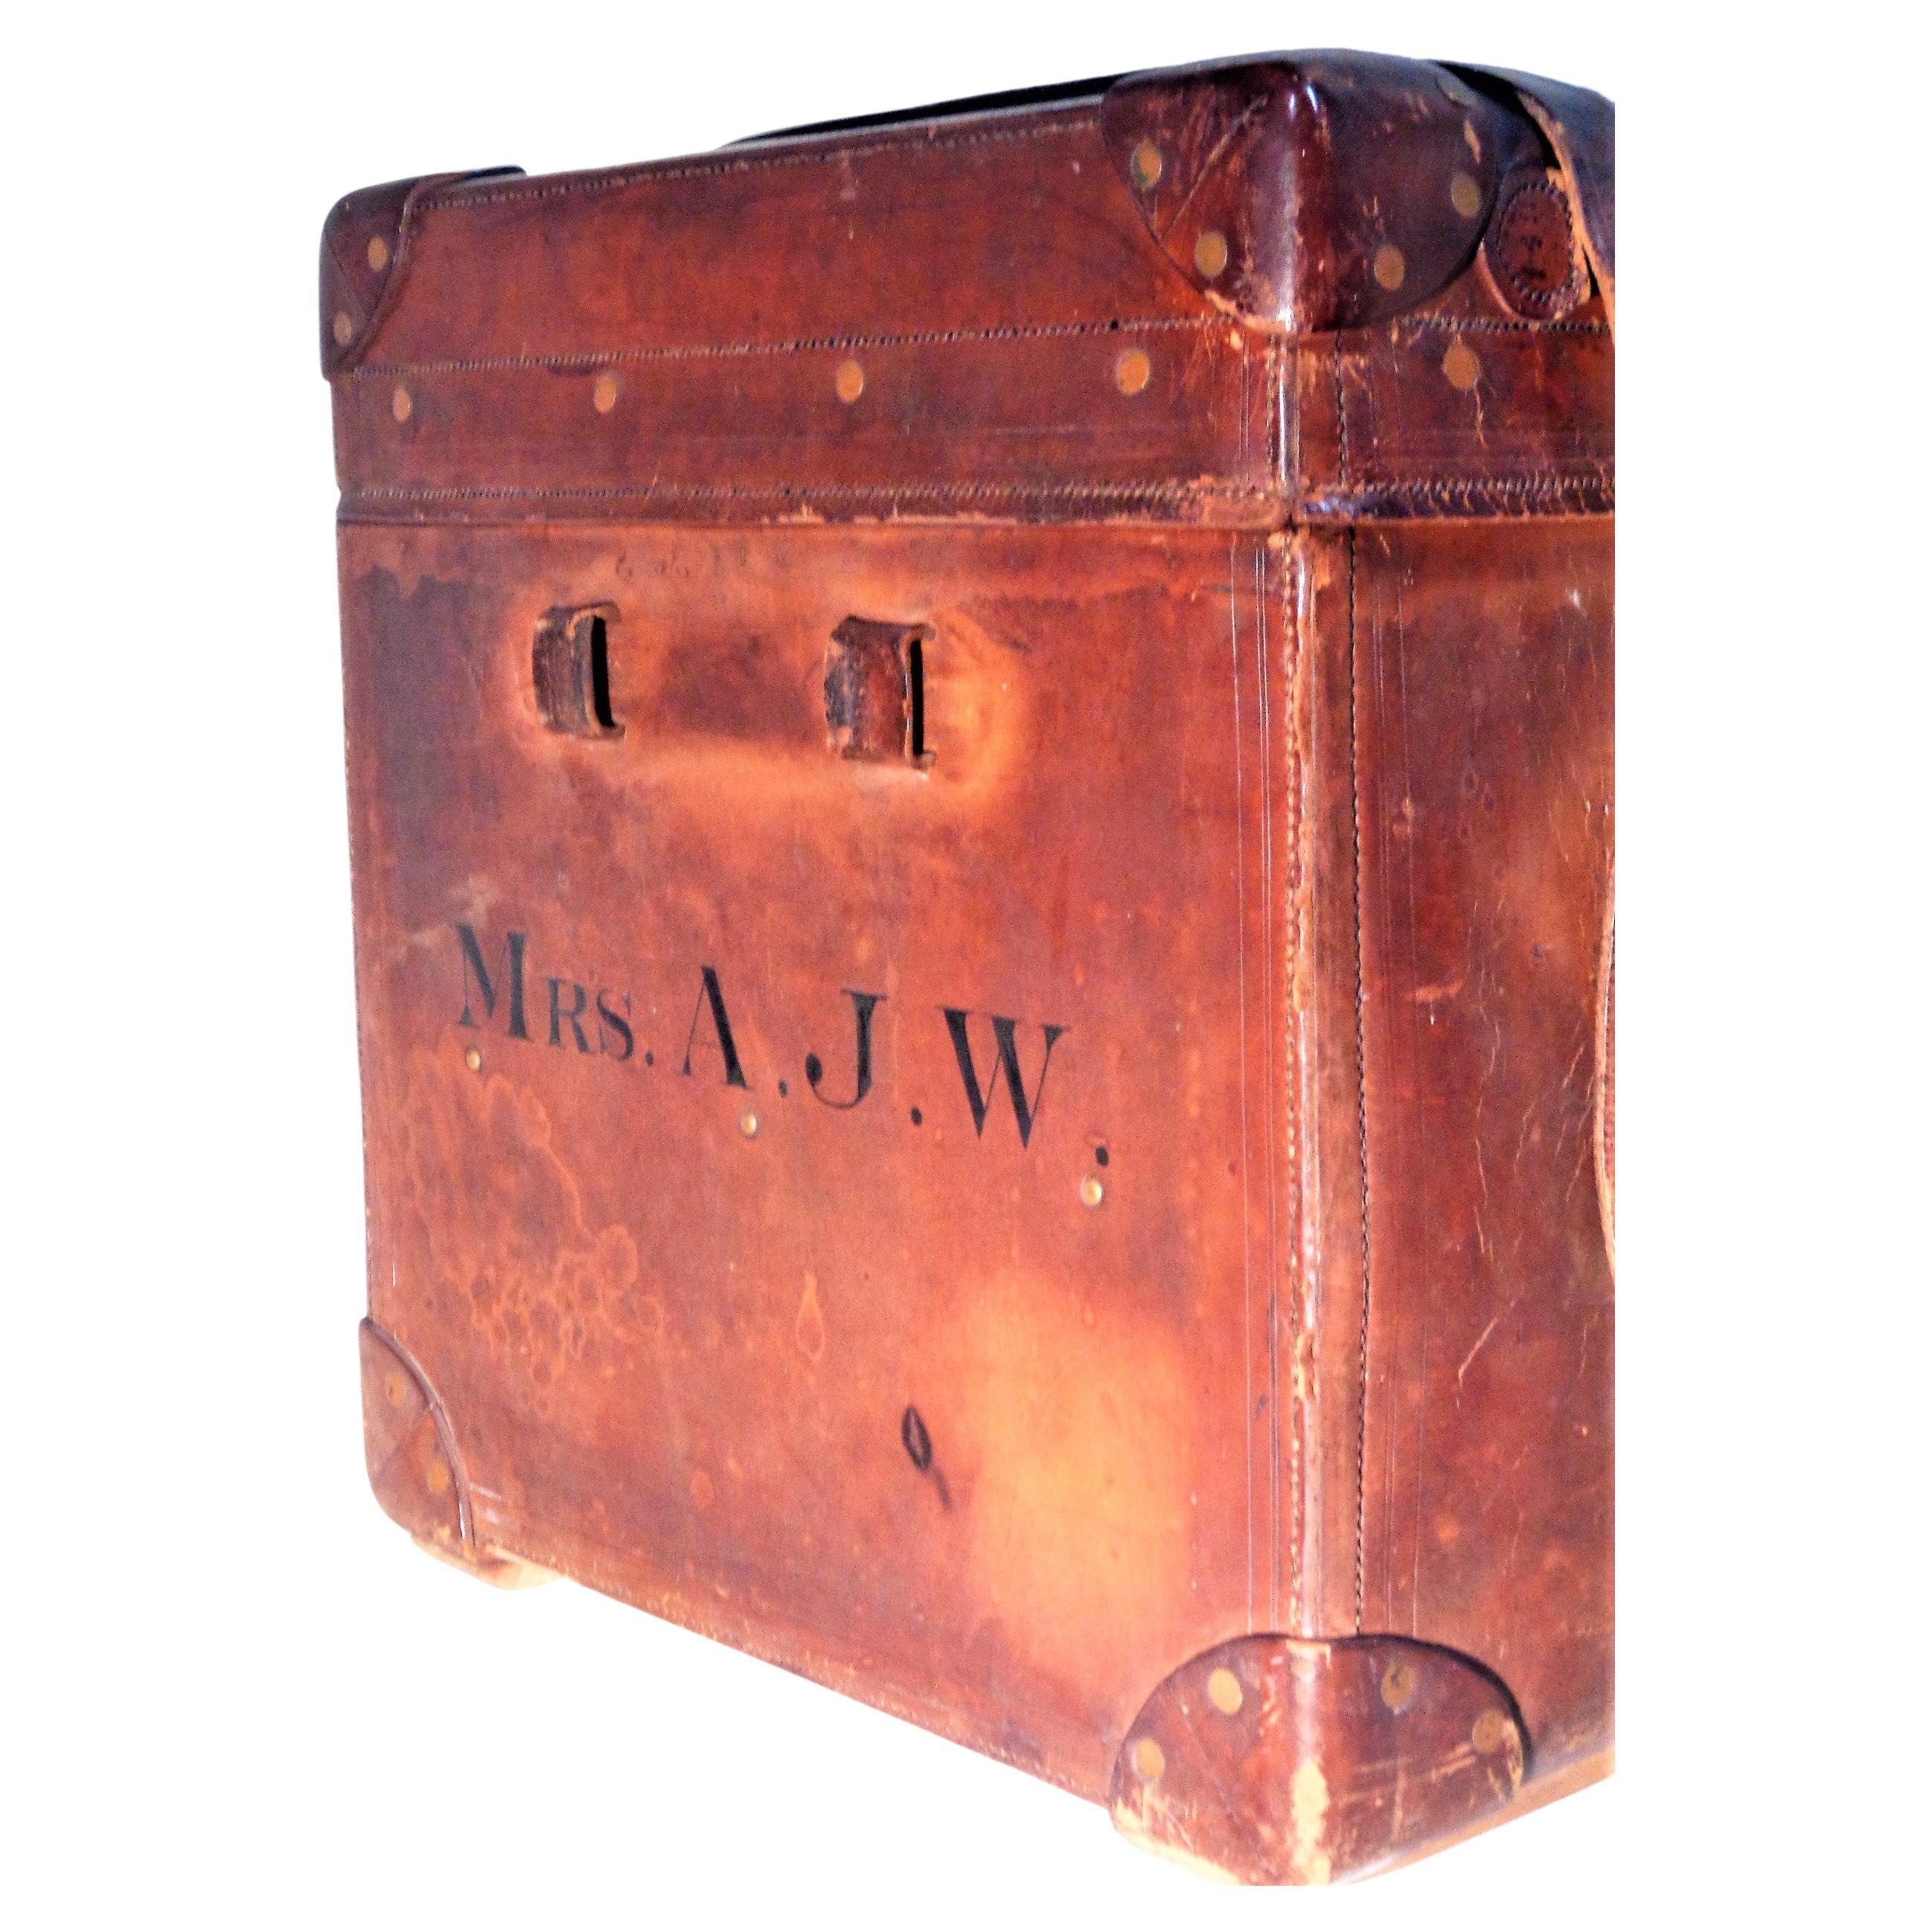 Hand-Crafted 19th C. Brass Riveted Leather Travel Trunk Sage's Trunk Depot Boston, Ma. For Sale